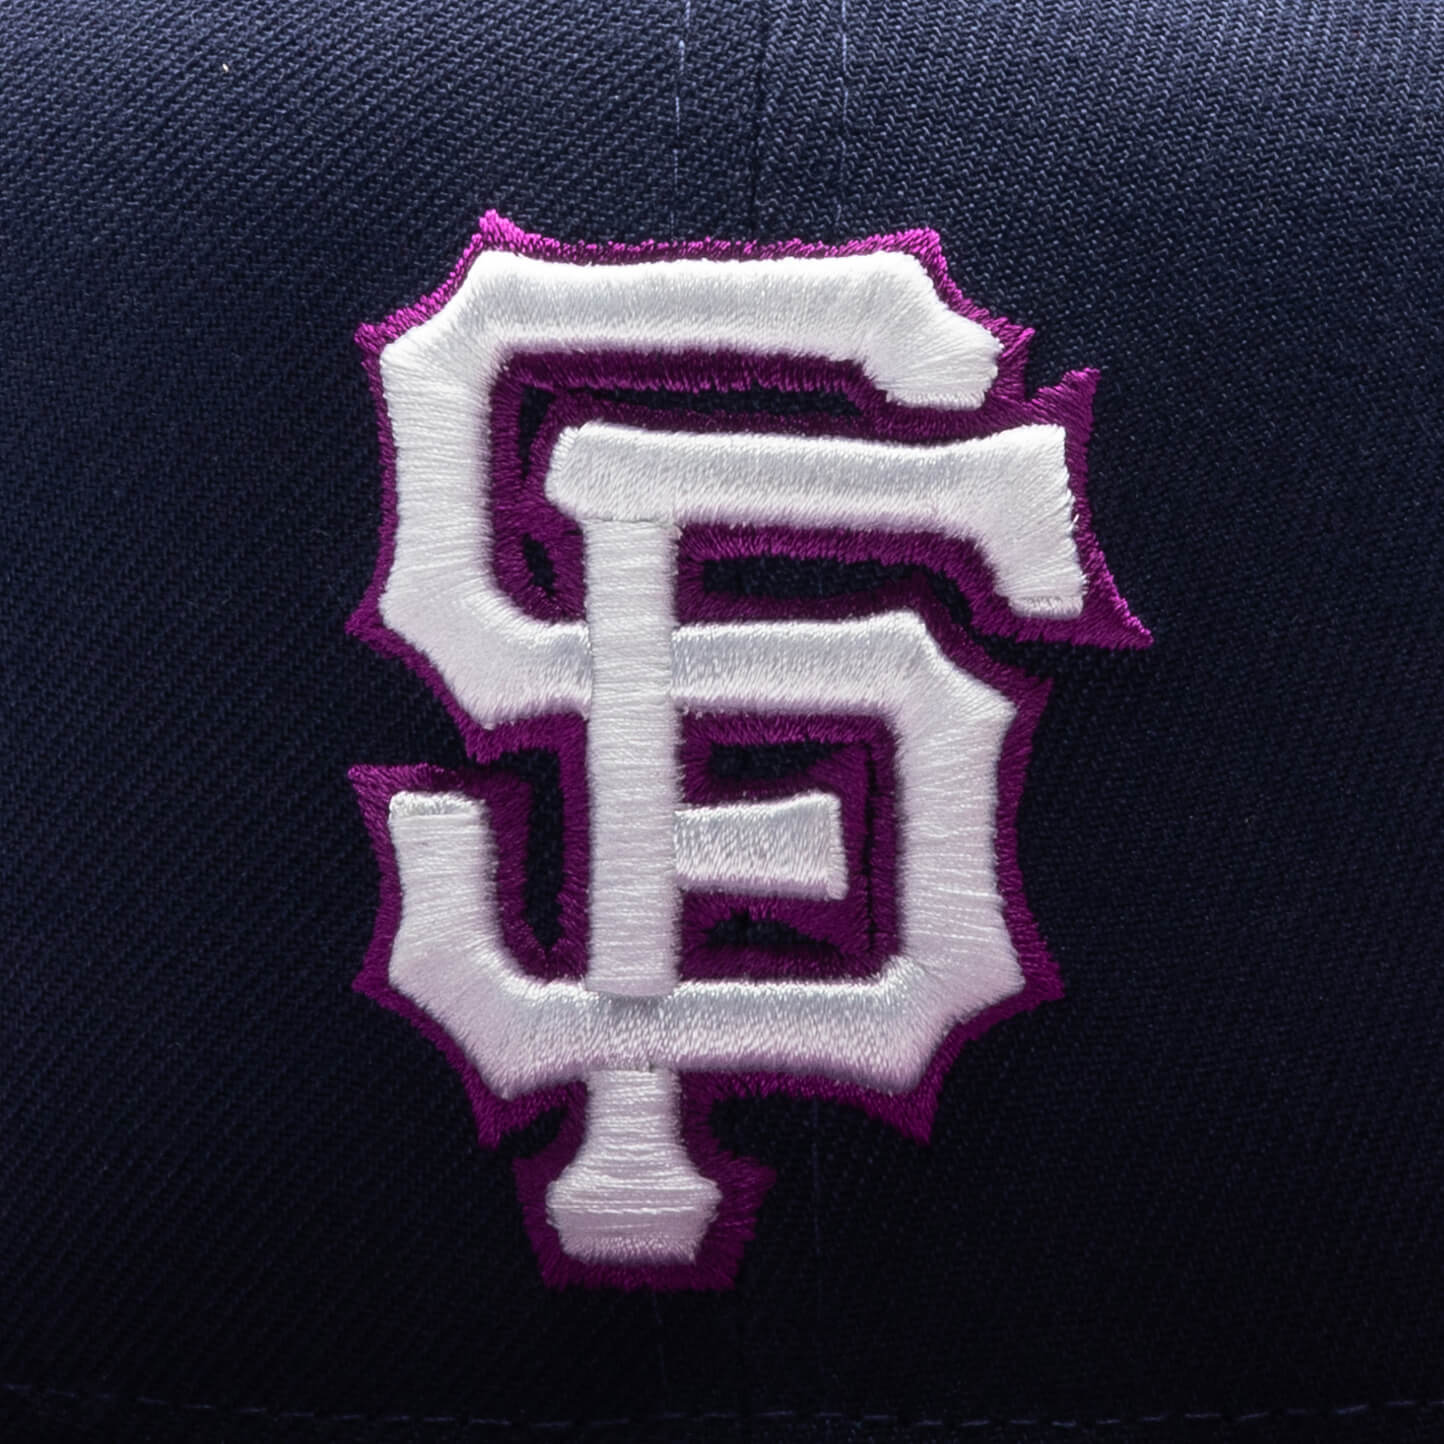 Feature x New Era 59FIFTY Fitted Fruit Pack - San Francisco Giants